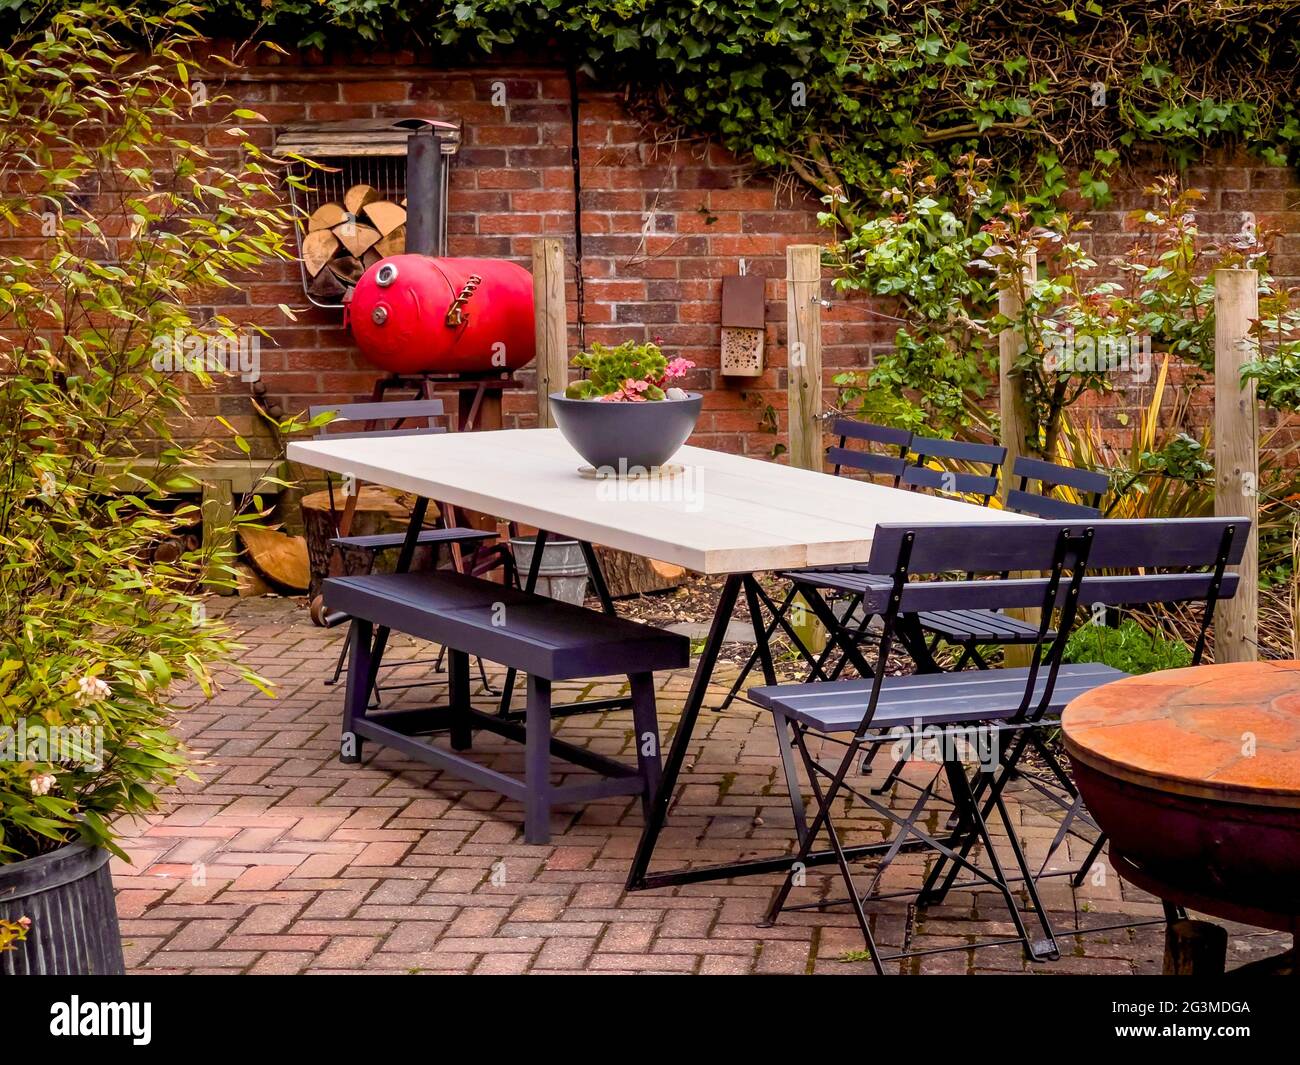 Outdoor patio area with large table and chairs Stock Photo